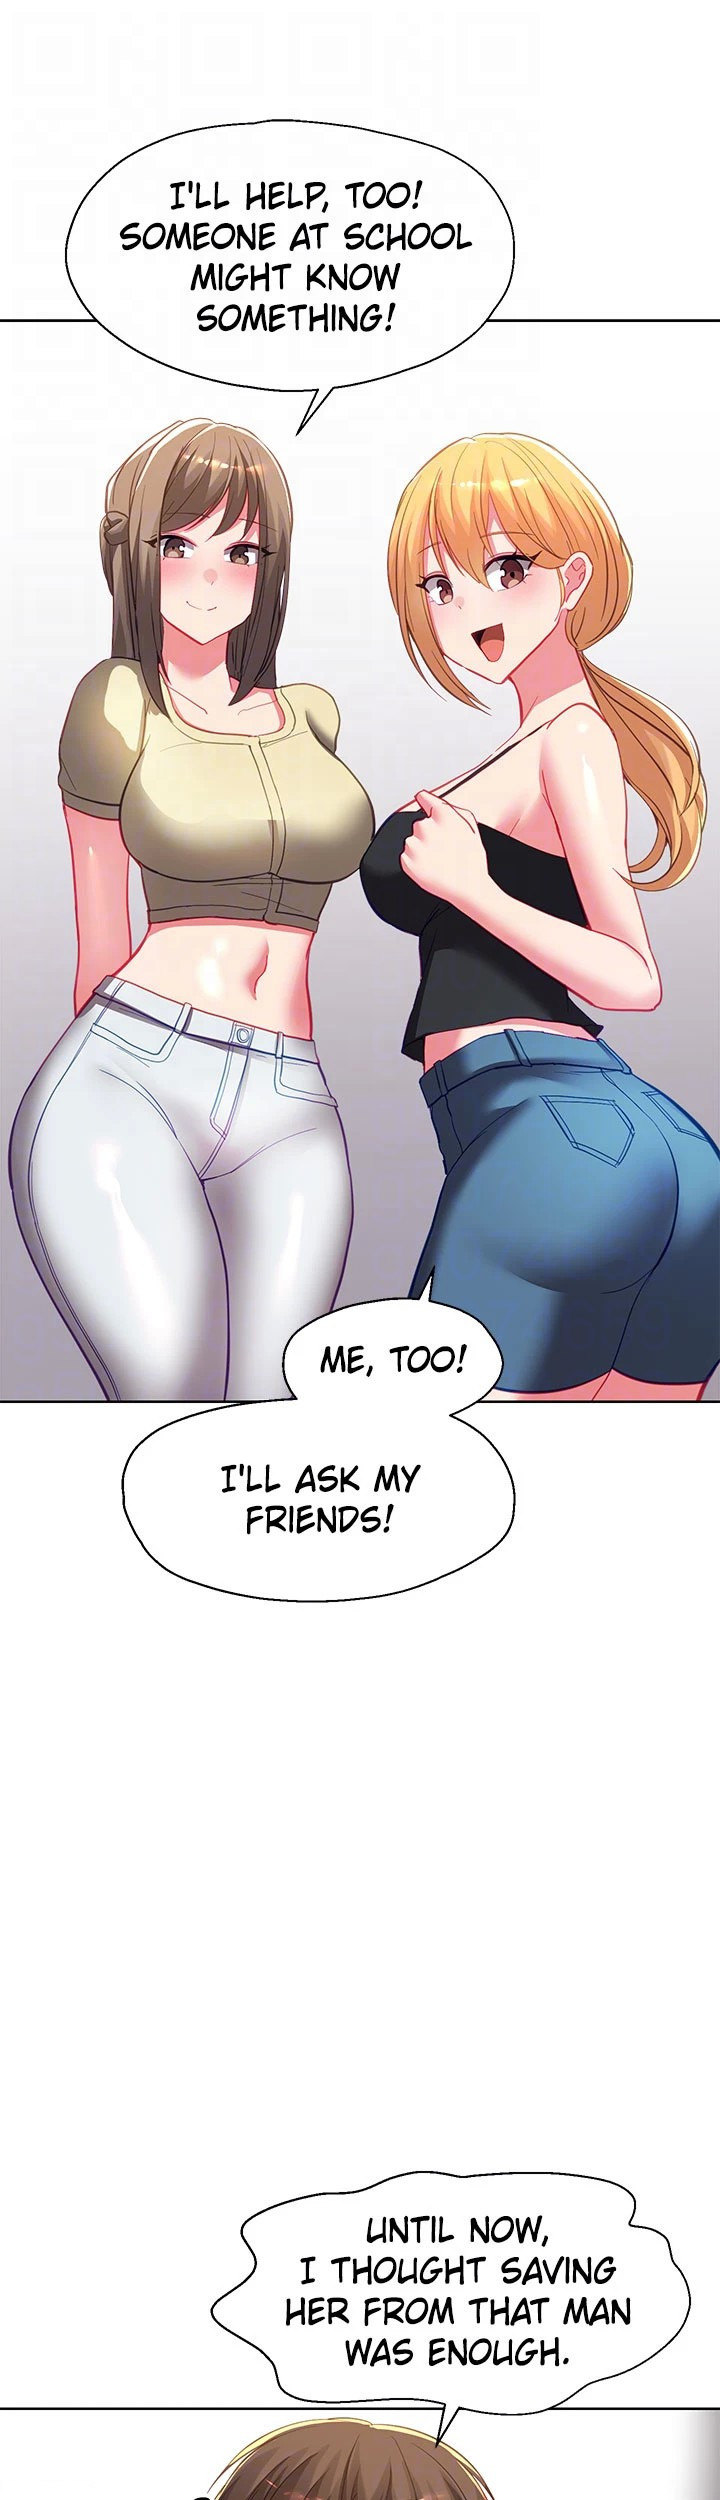 Girls I Used to Teach - Chapter 39 Page 11